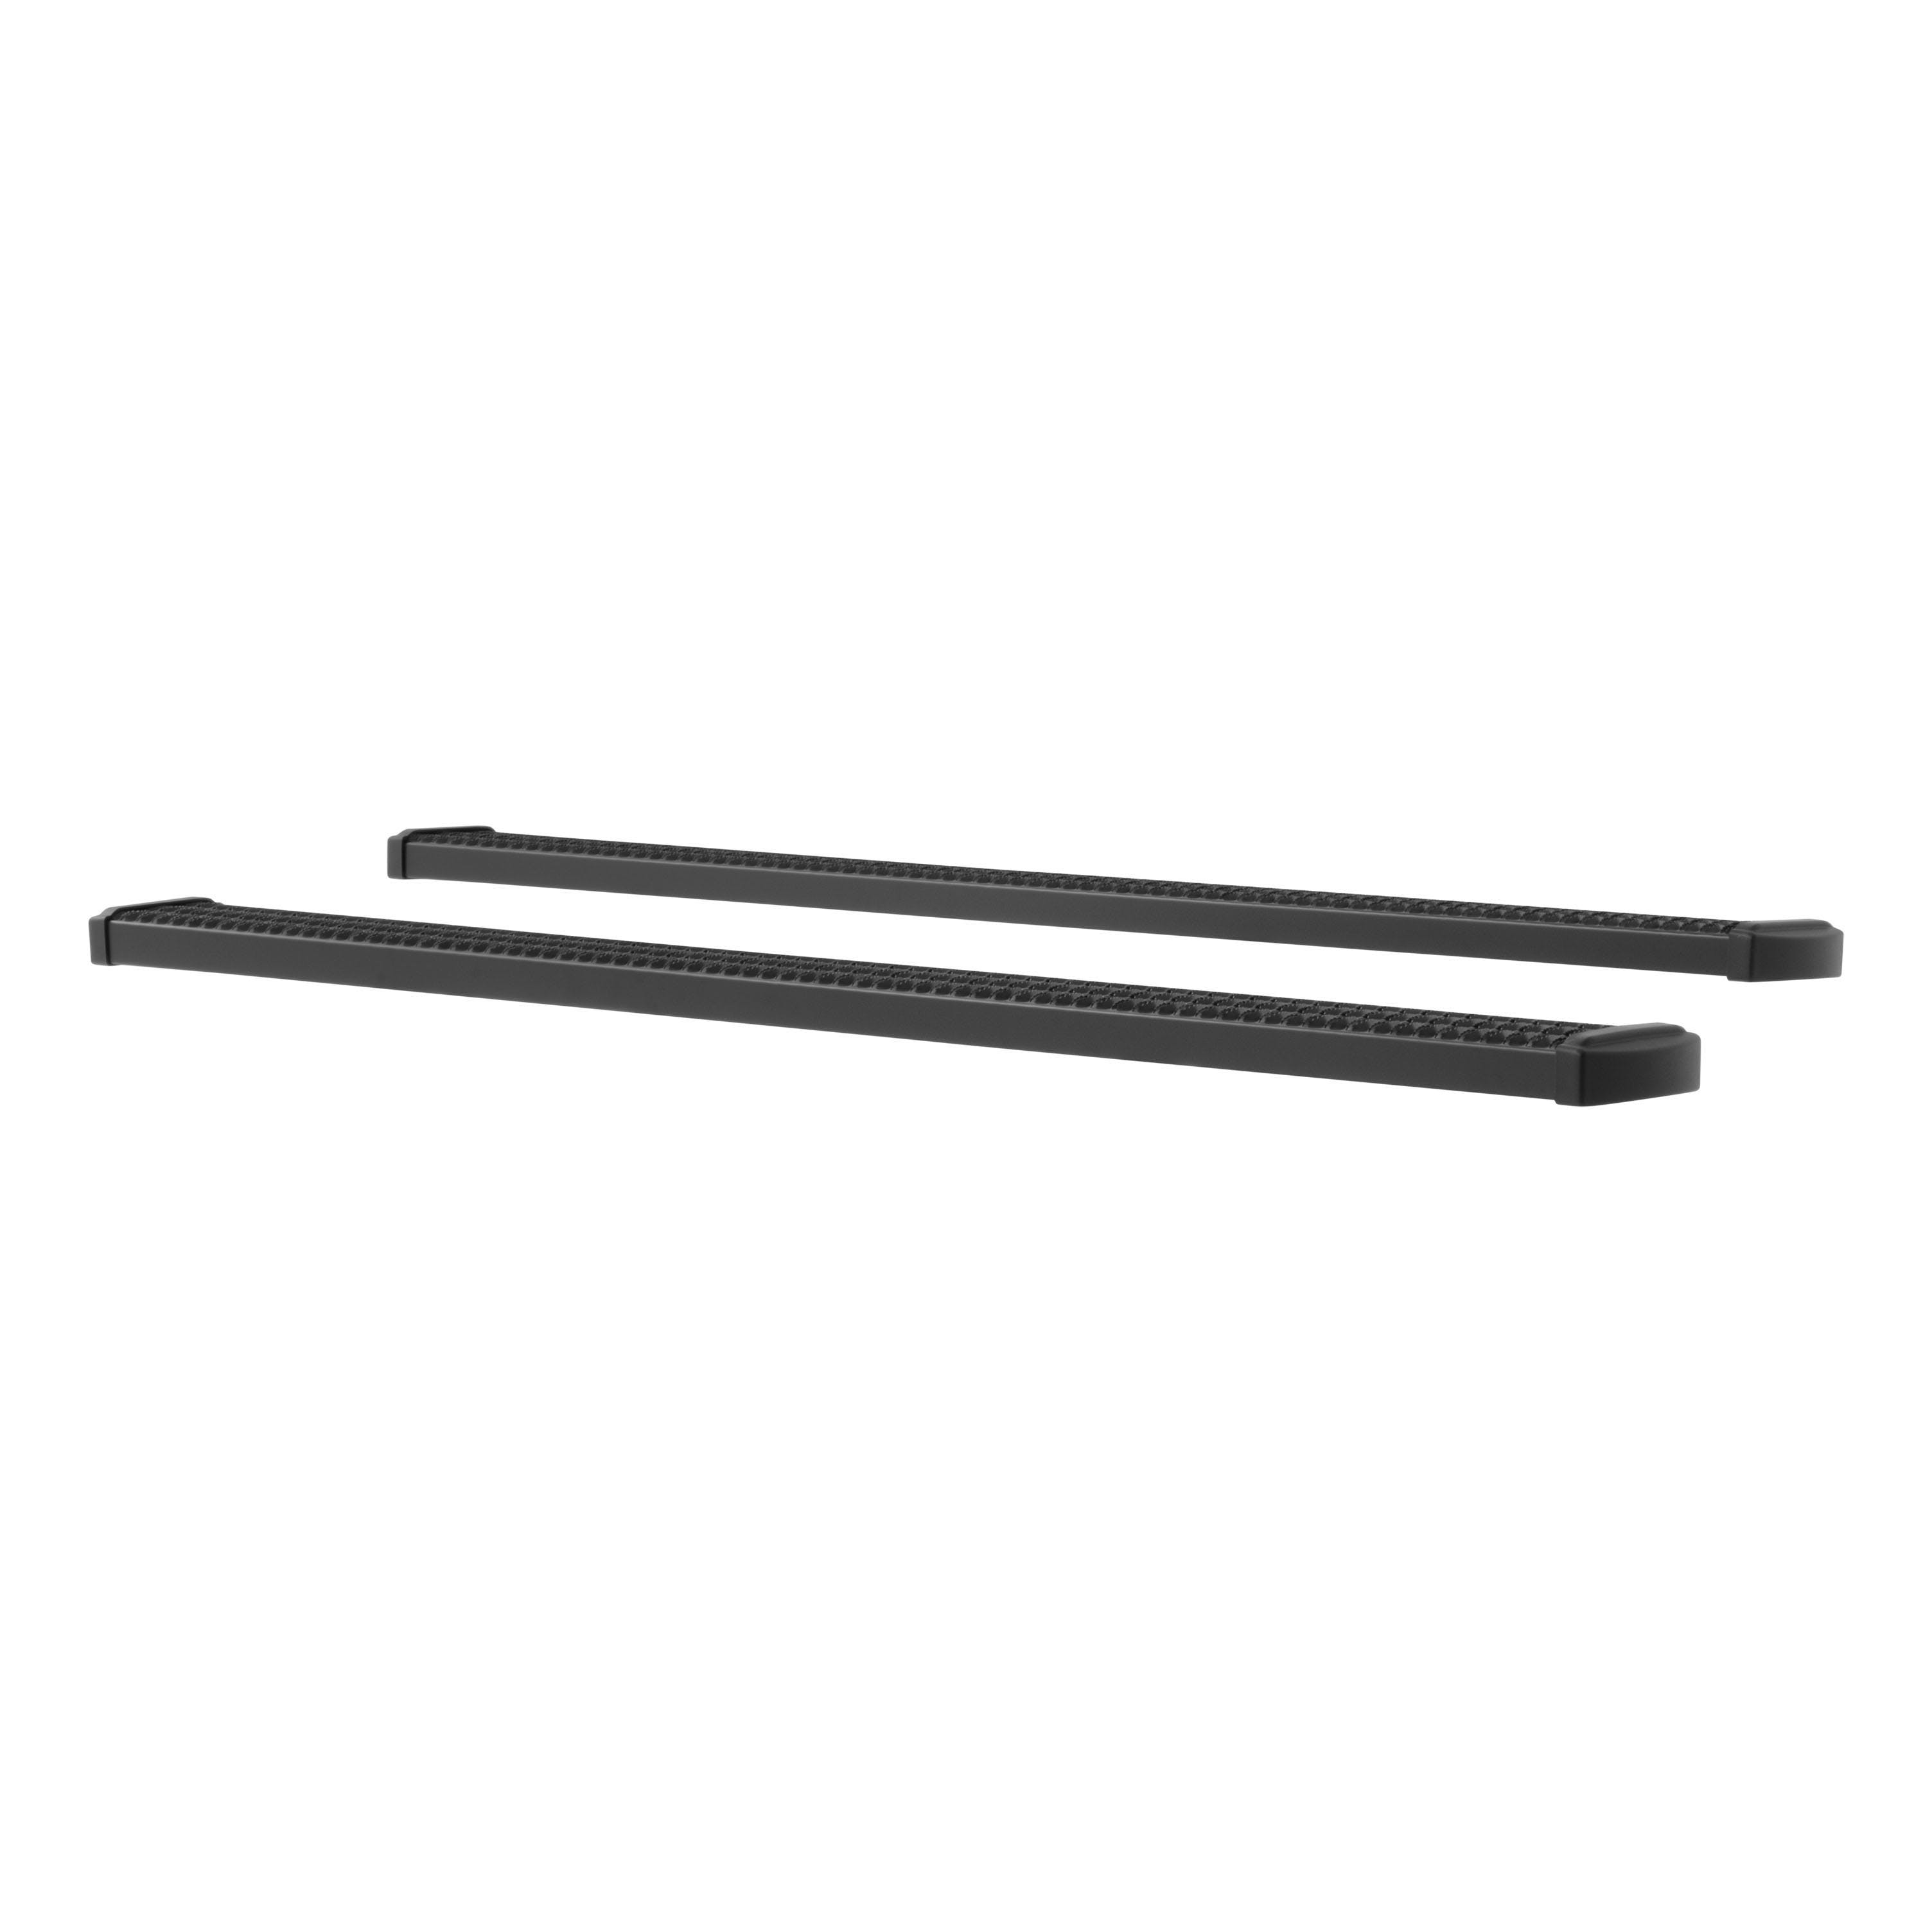 LUVERNE 415088-401747 Grip Step 7 inch Running Boards